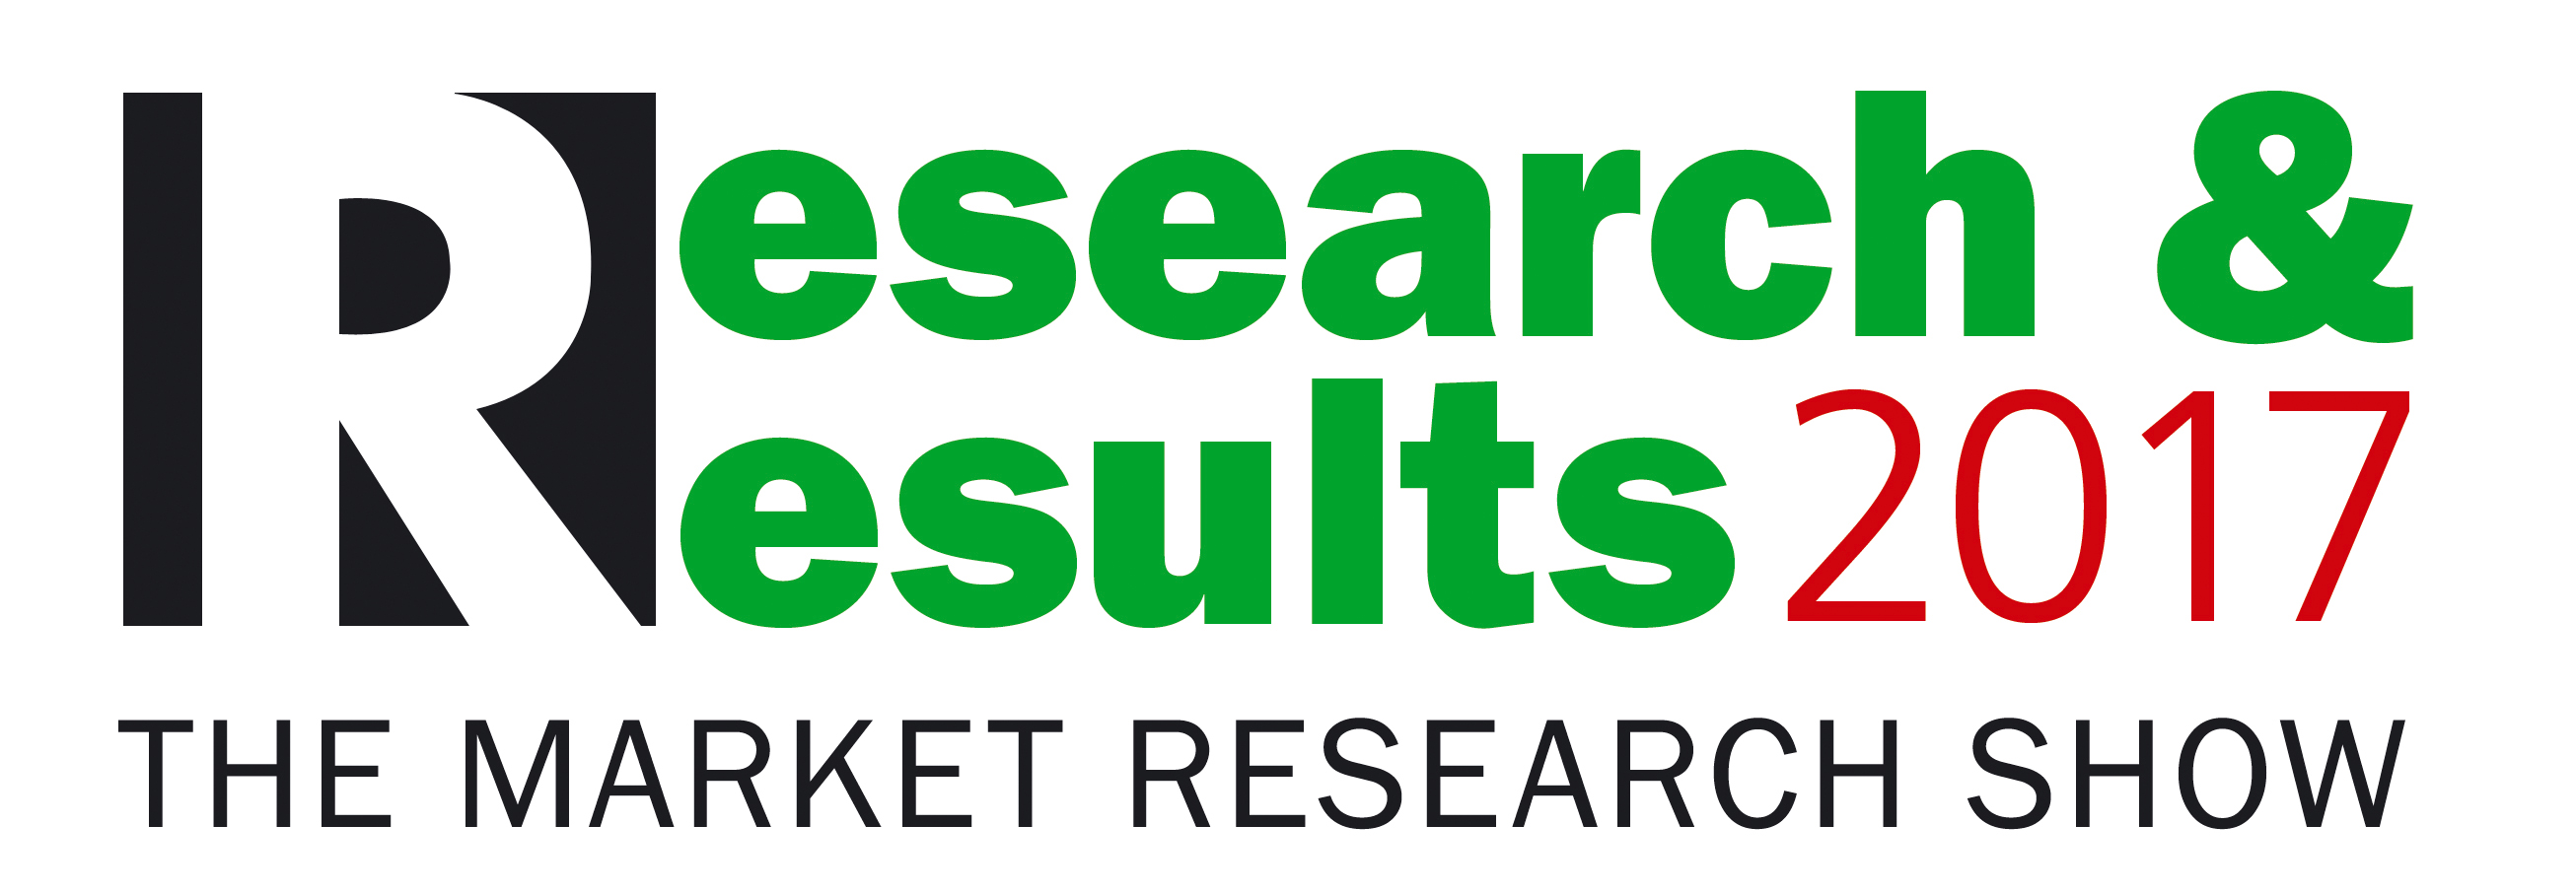 Research & Results event Logo 